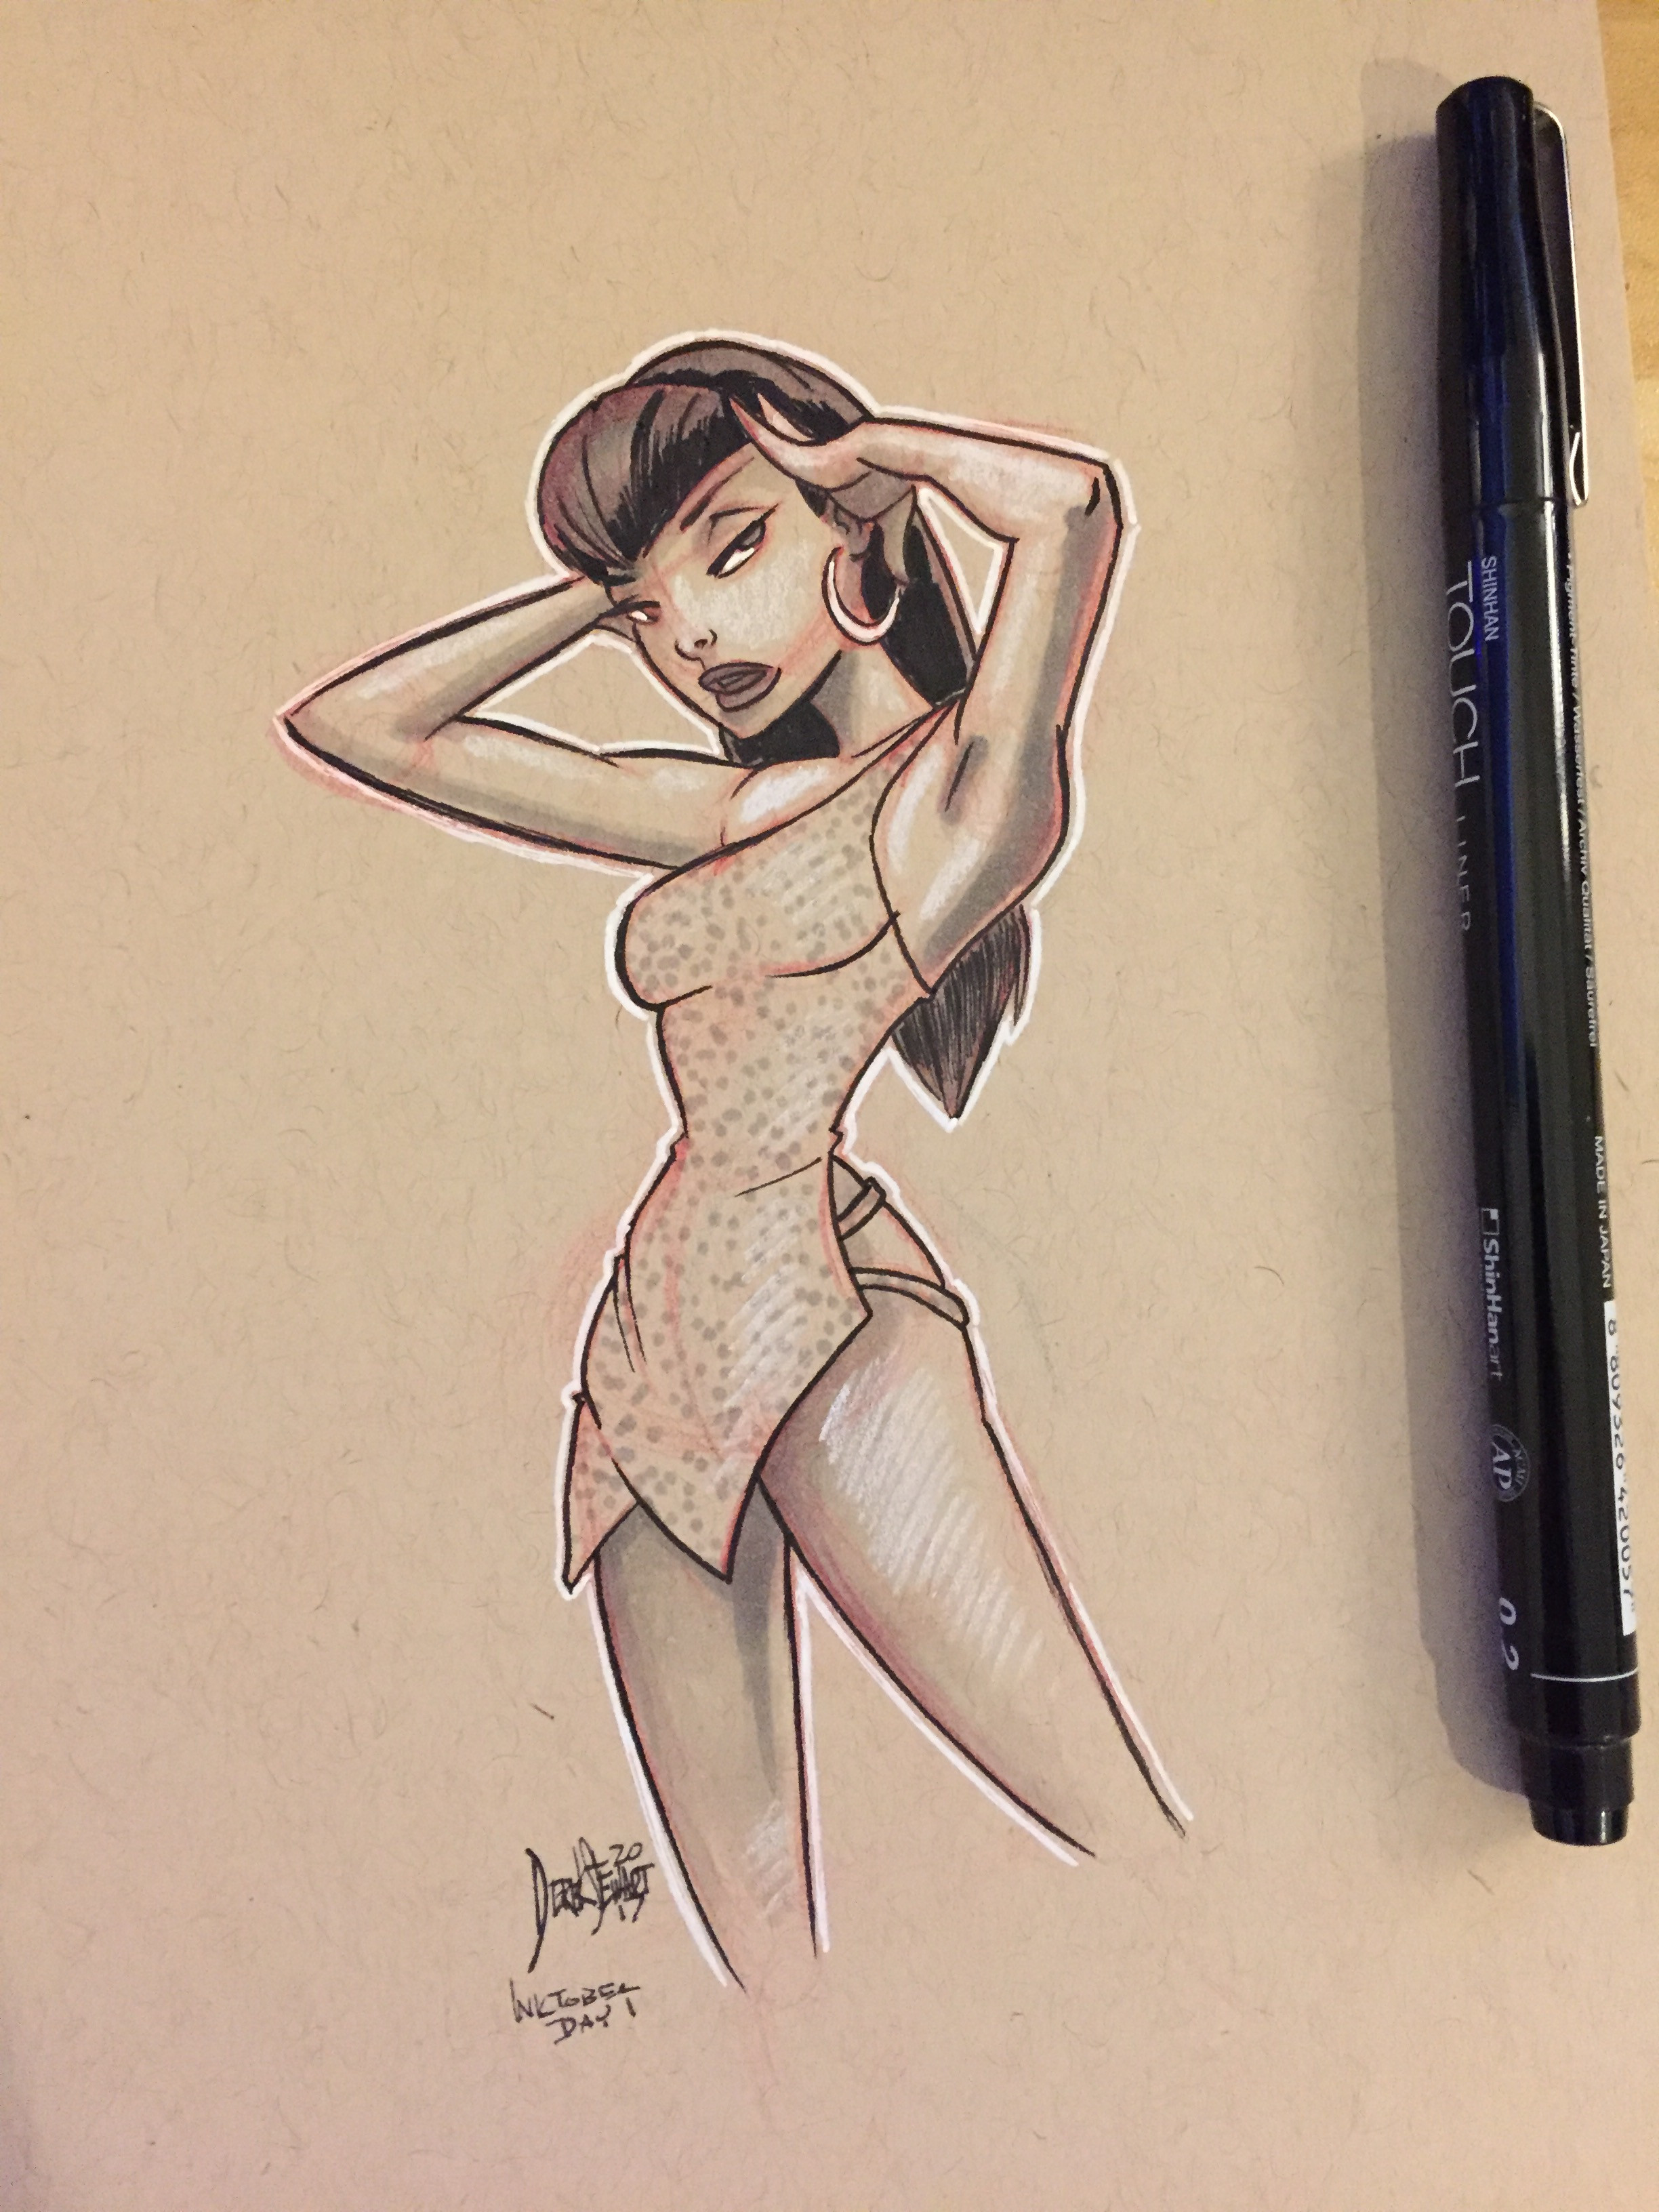 This prompt really only applied to the speed at which I came up with this drawing based on a classic photo of Bettie Page.